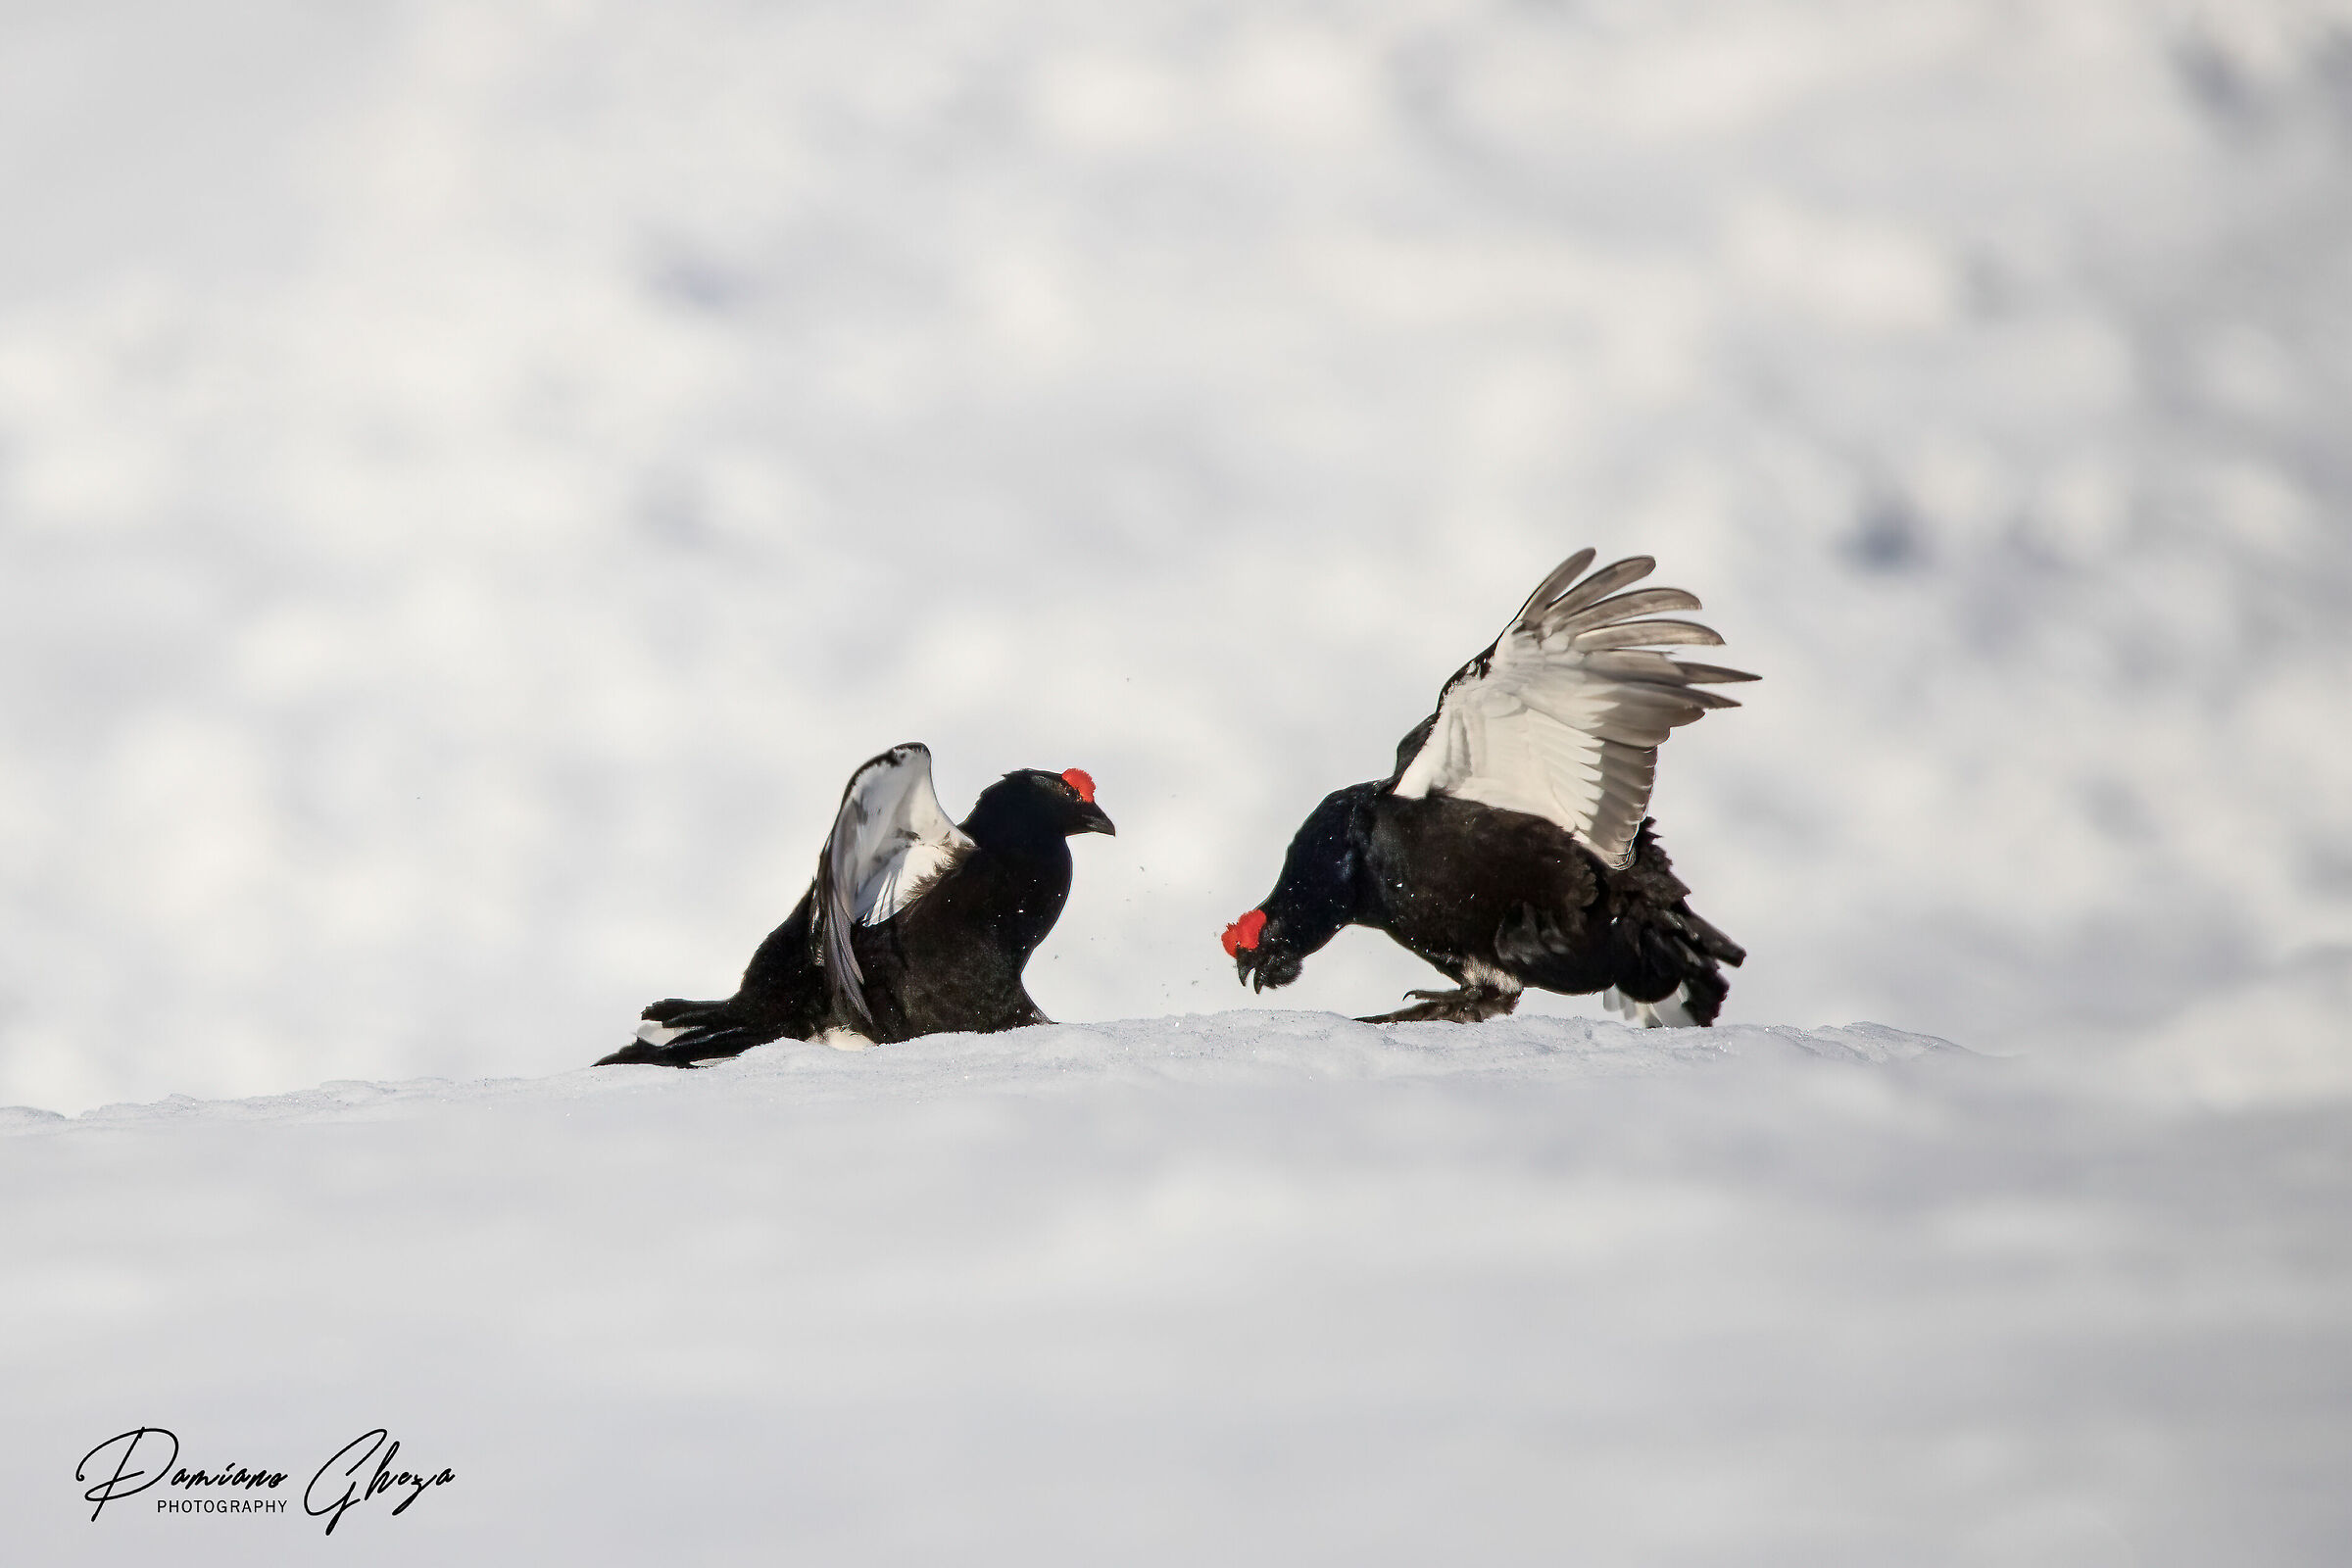 Fight between grouse...